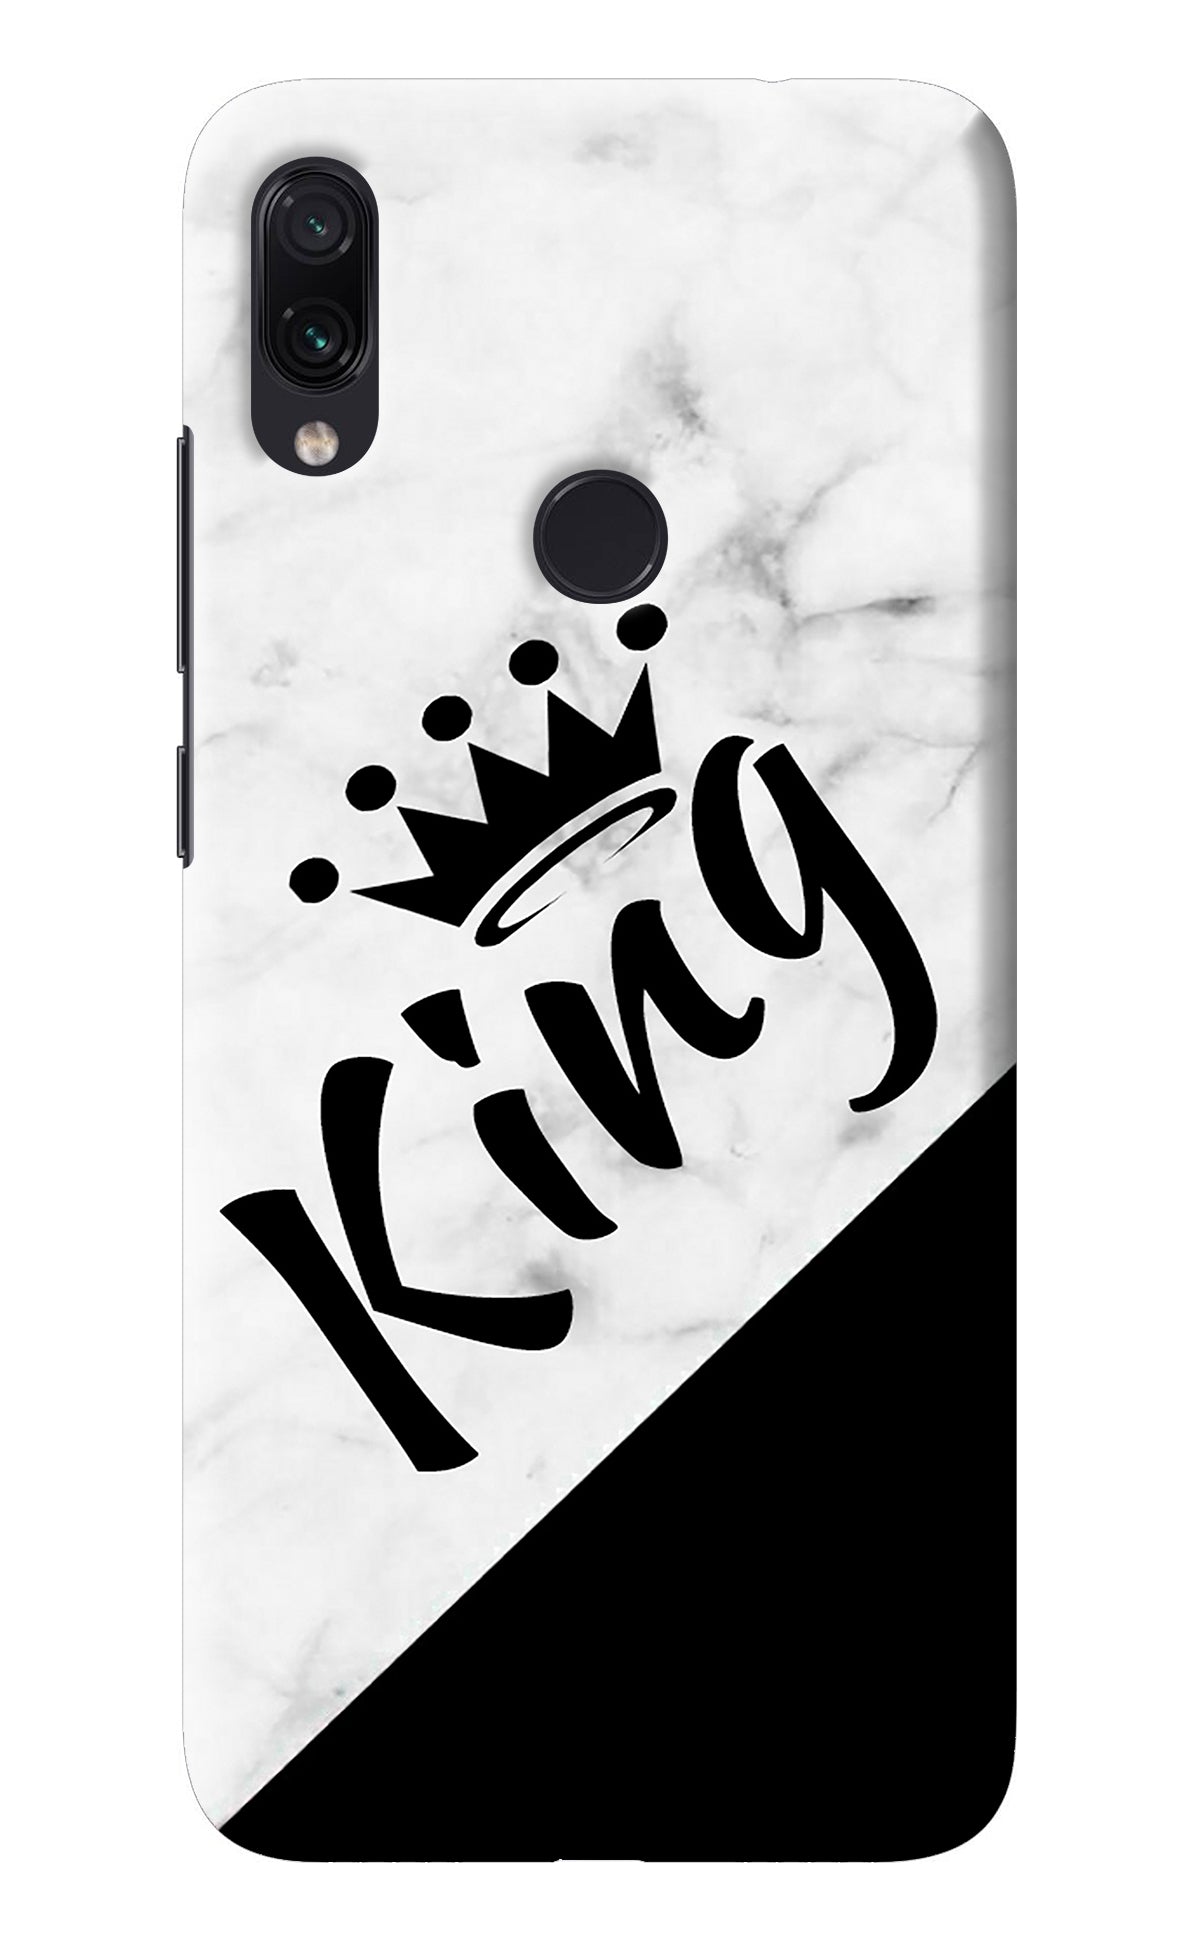 King Redmi Note 7 Pro Back Cover